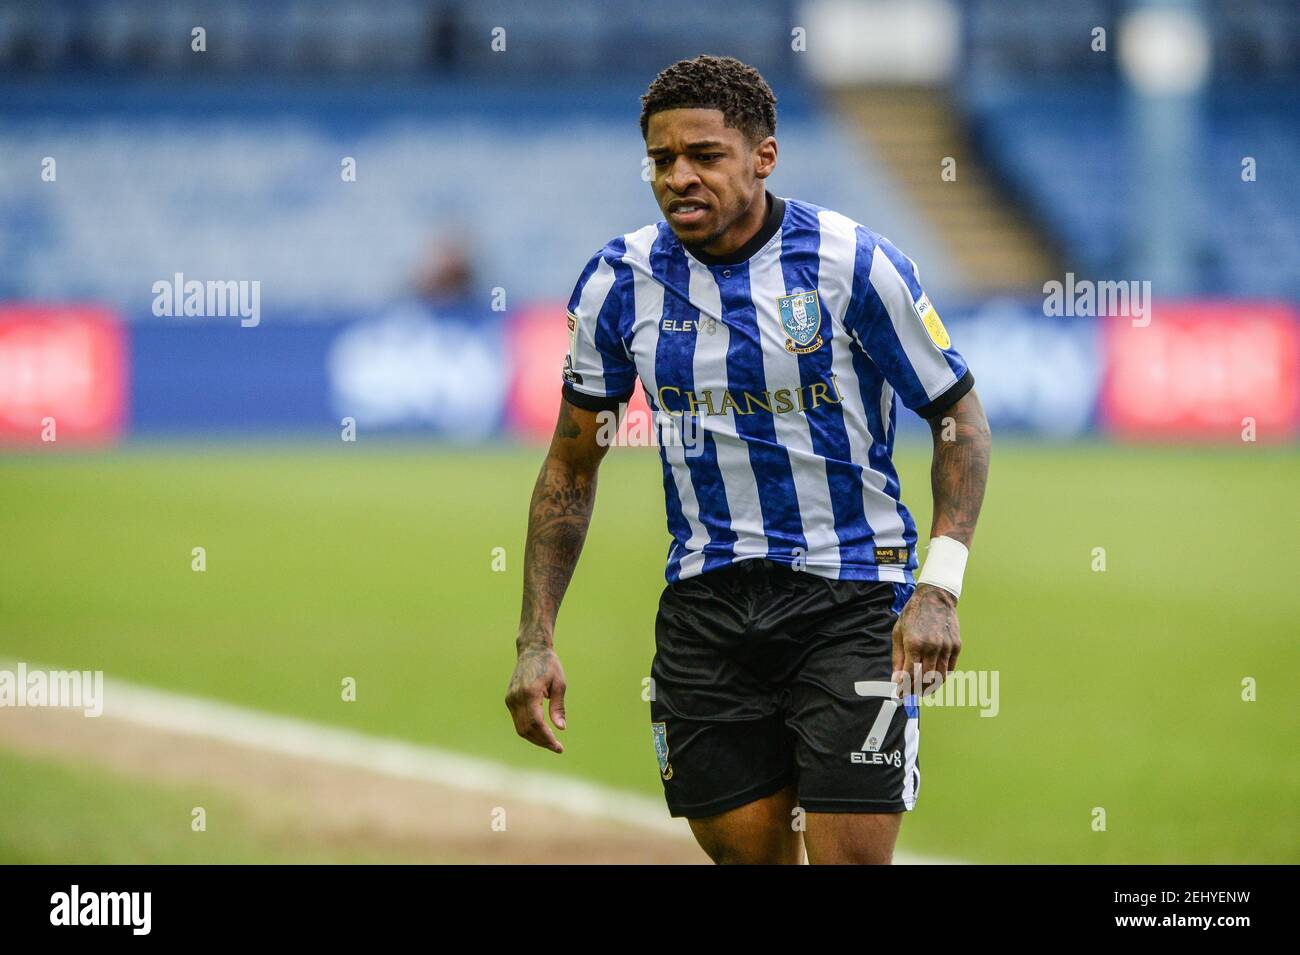 Sheffield, UK. 13th Feb, 2021. Kadeem Harris #7 of Sheffield Wednesday during the game in Sheffield, UK on 2/13/2021. (Photo by Dean Williams/News Images/Sipa USA) Credit: Sipa USA/Alamy Live News Stock Photo